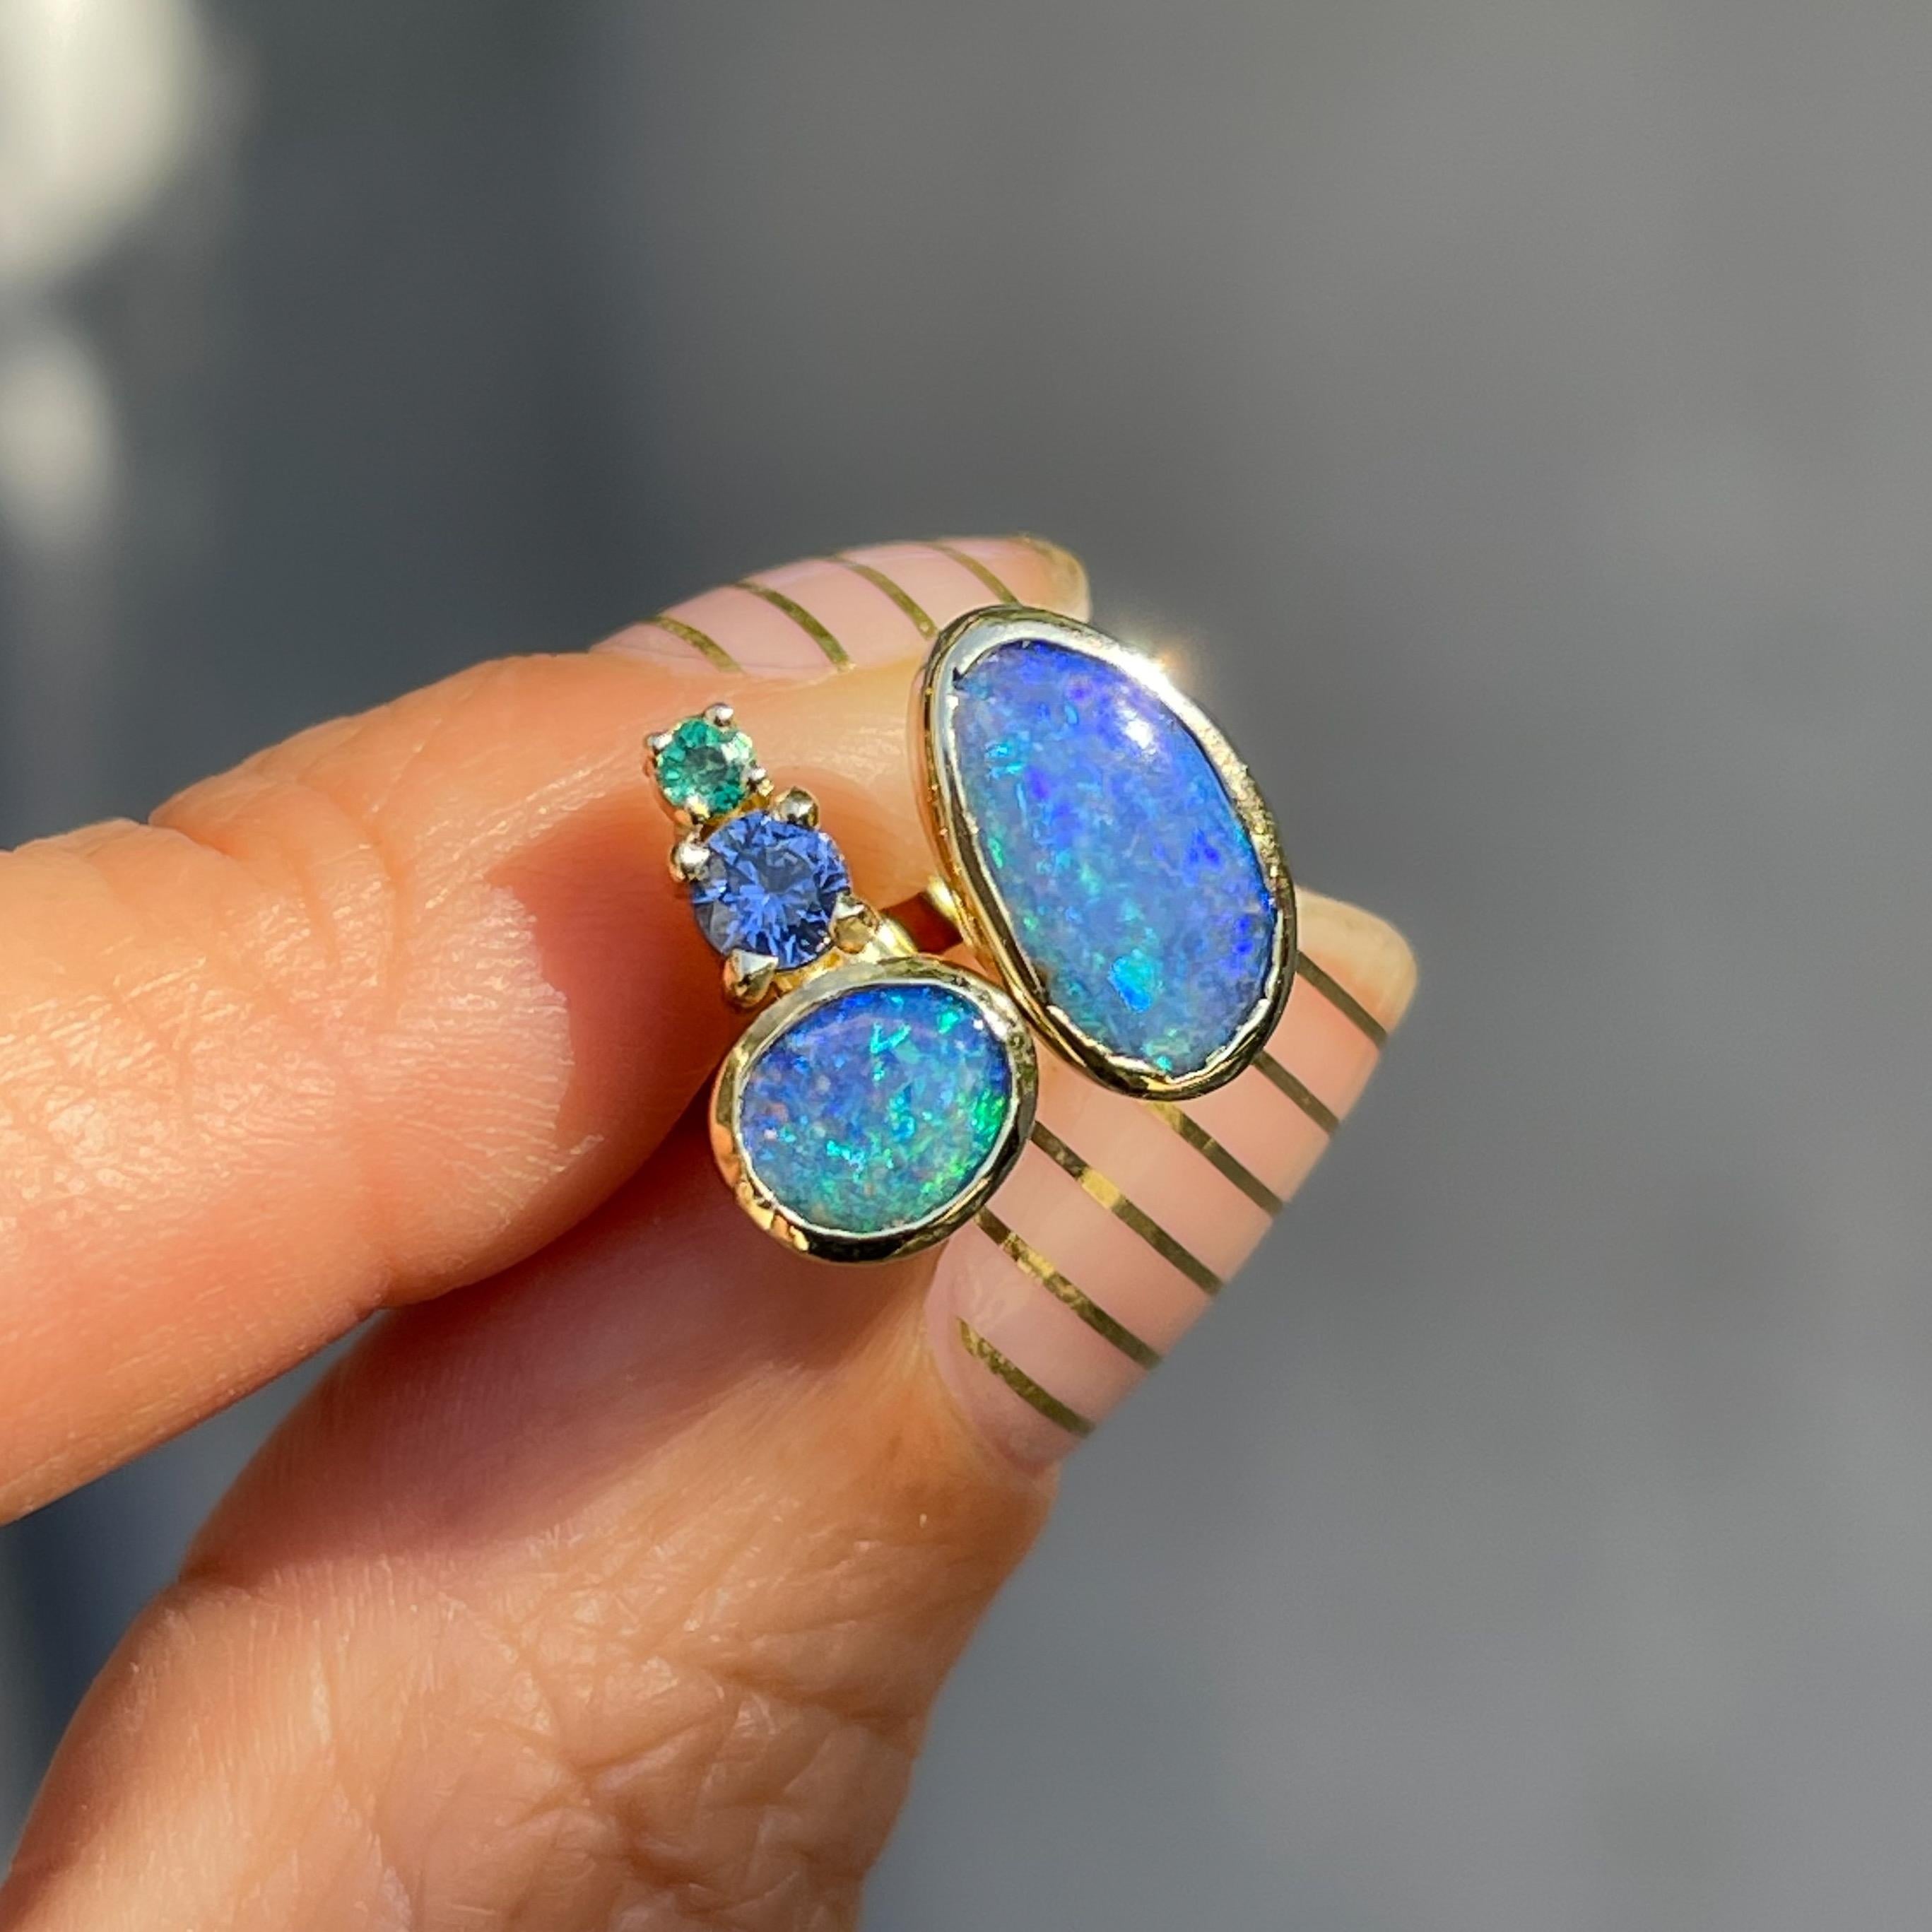 Australian Opal meets emerald and blue sapphire in the Bali Emerald and Opal Stud Earrings.  Each Boulder Opal in this pair of mismatched earrings reflects gorgeous blues and greens drawn right from the sea.  These stunning hues are echoed in the